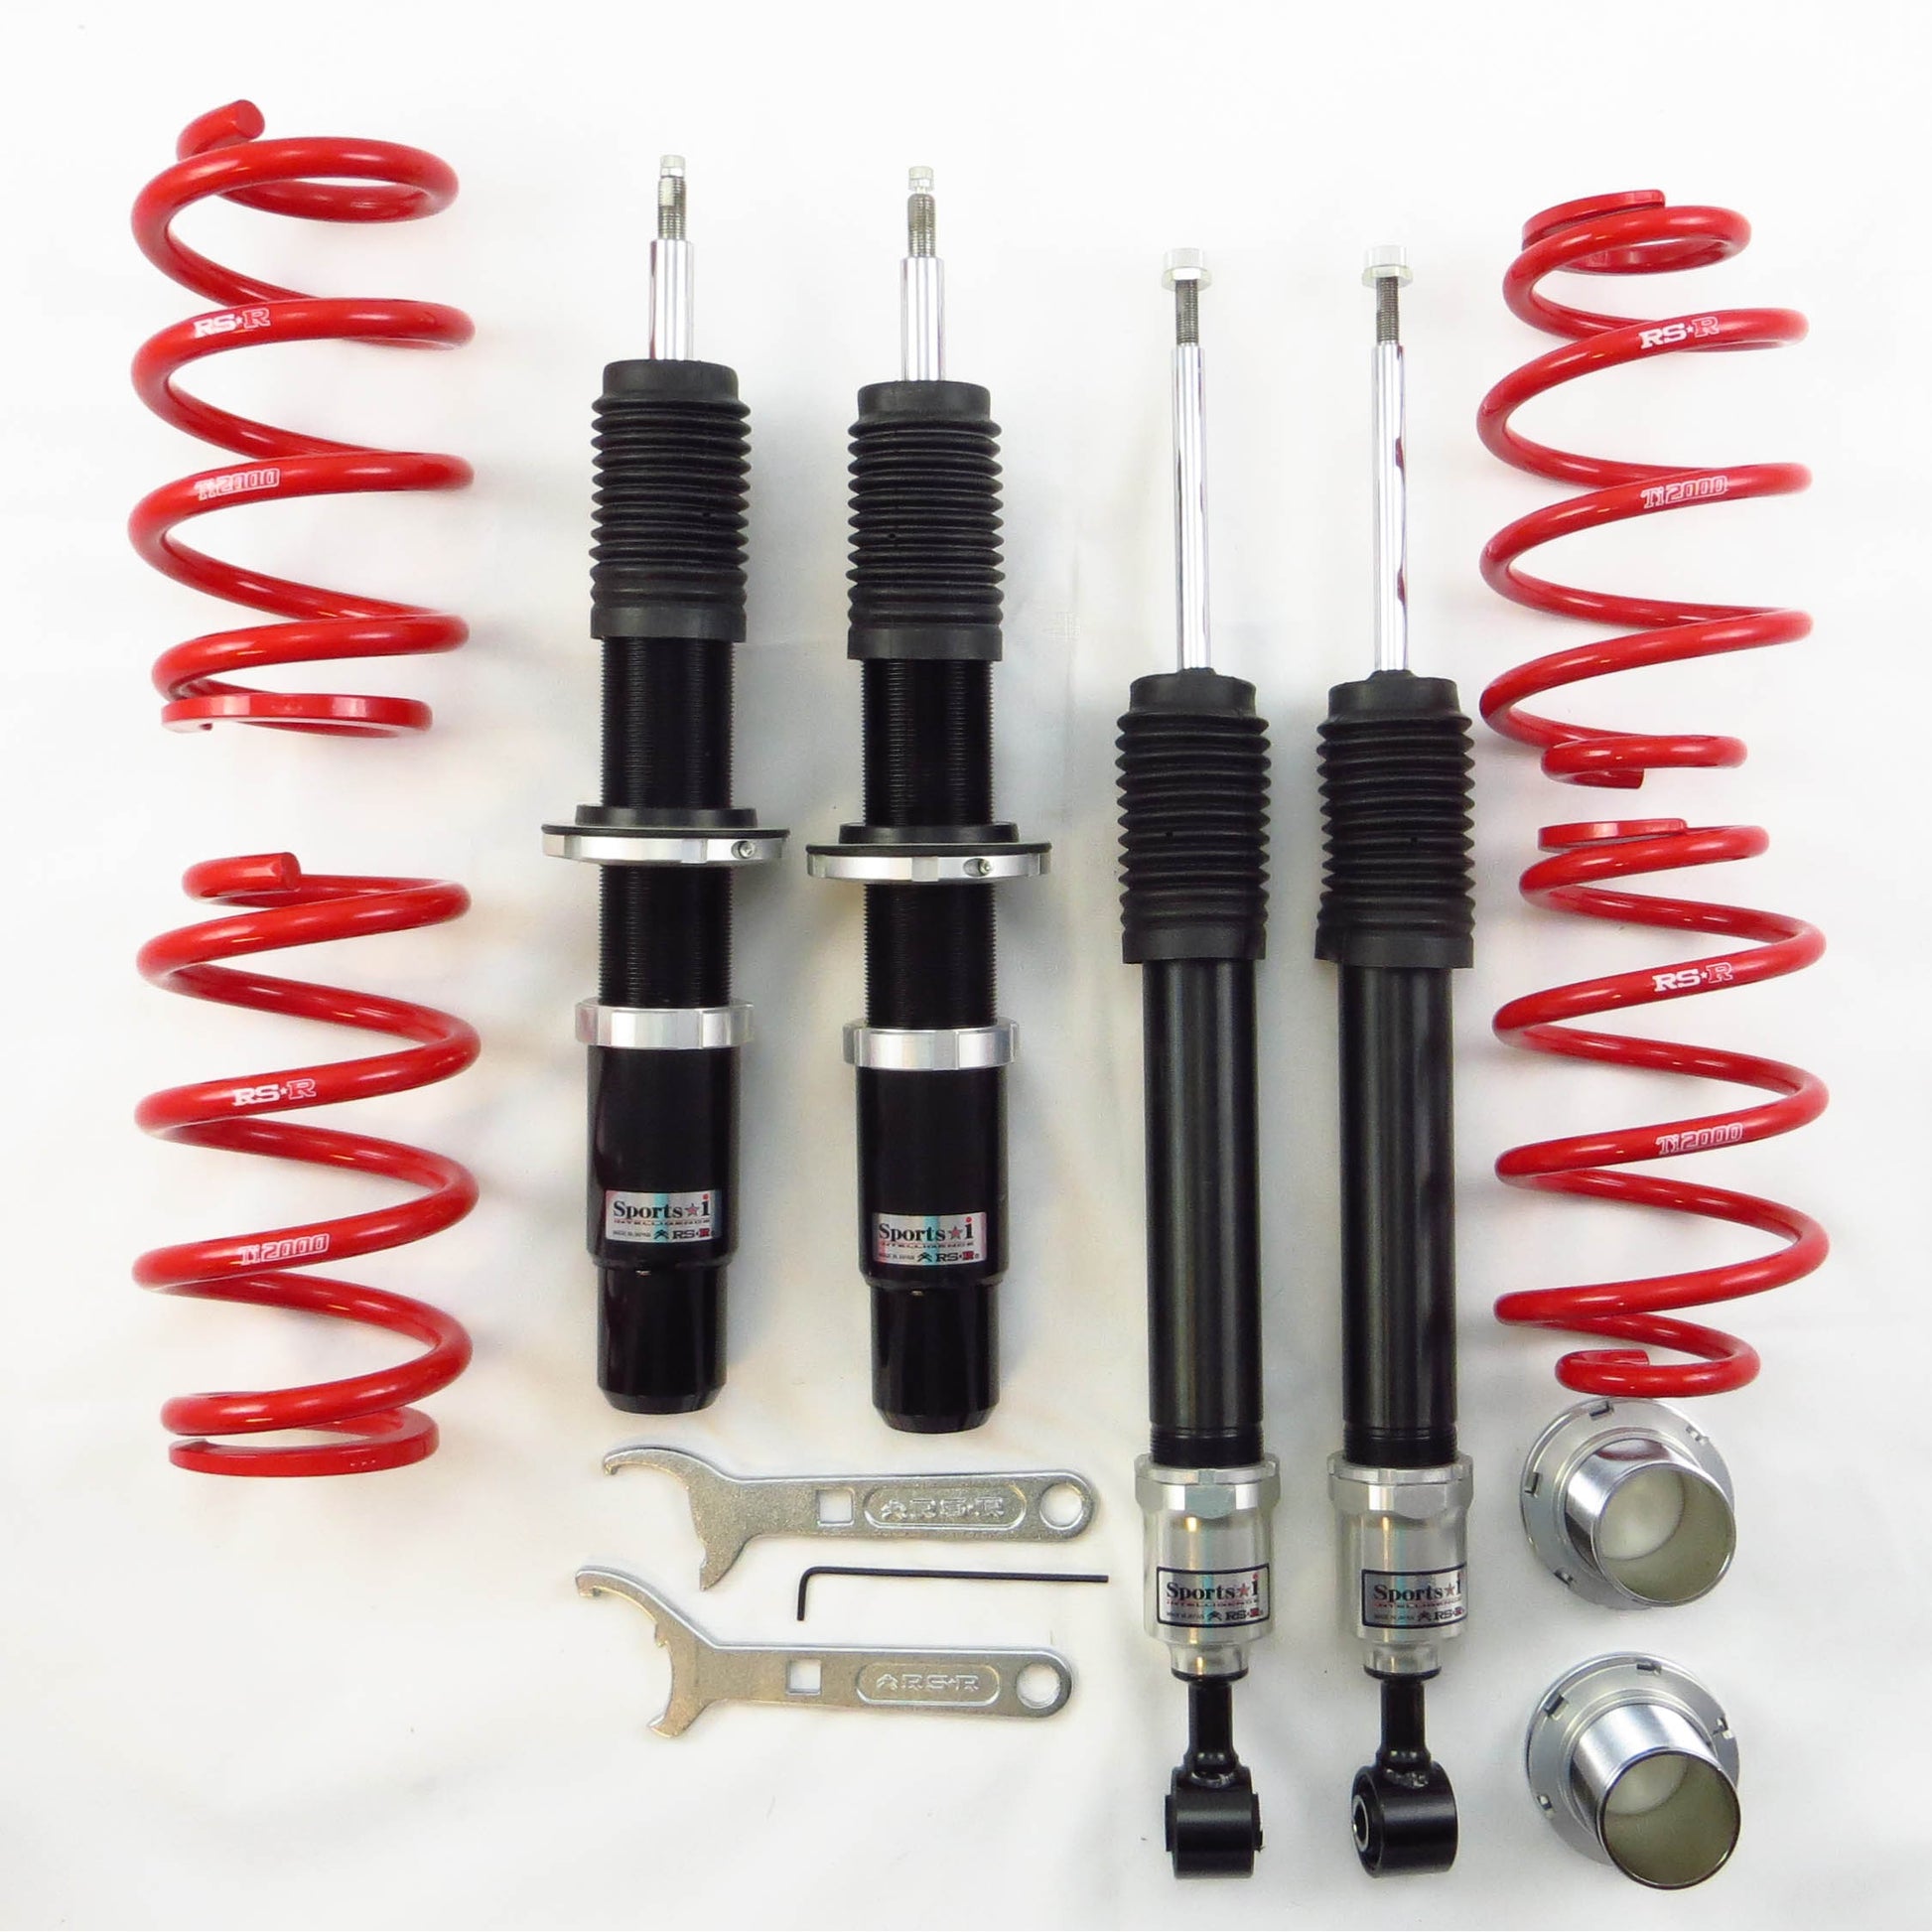 AUDI A4 SPORTS-I COILOVERS 2009-2014